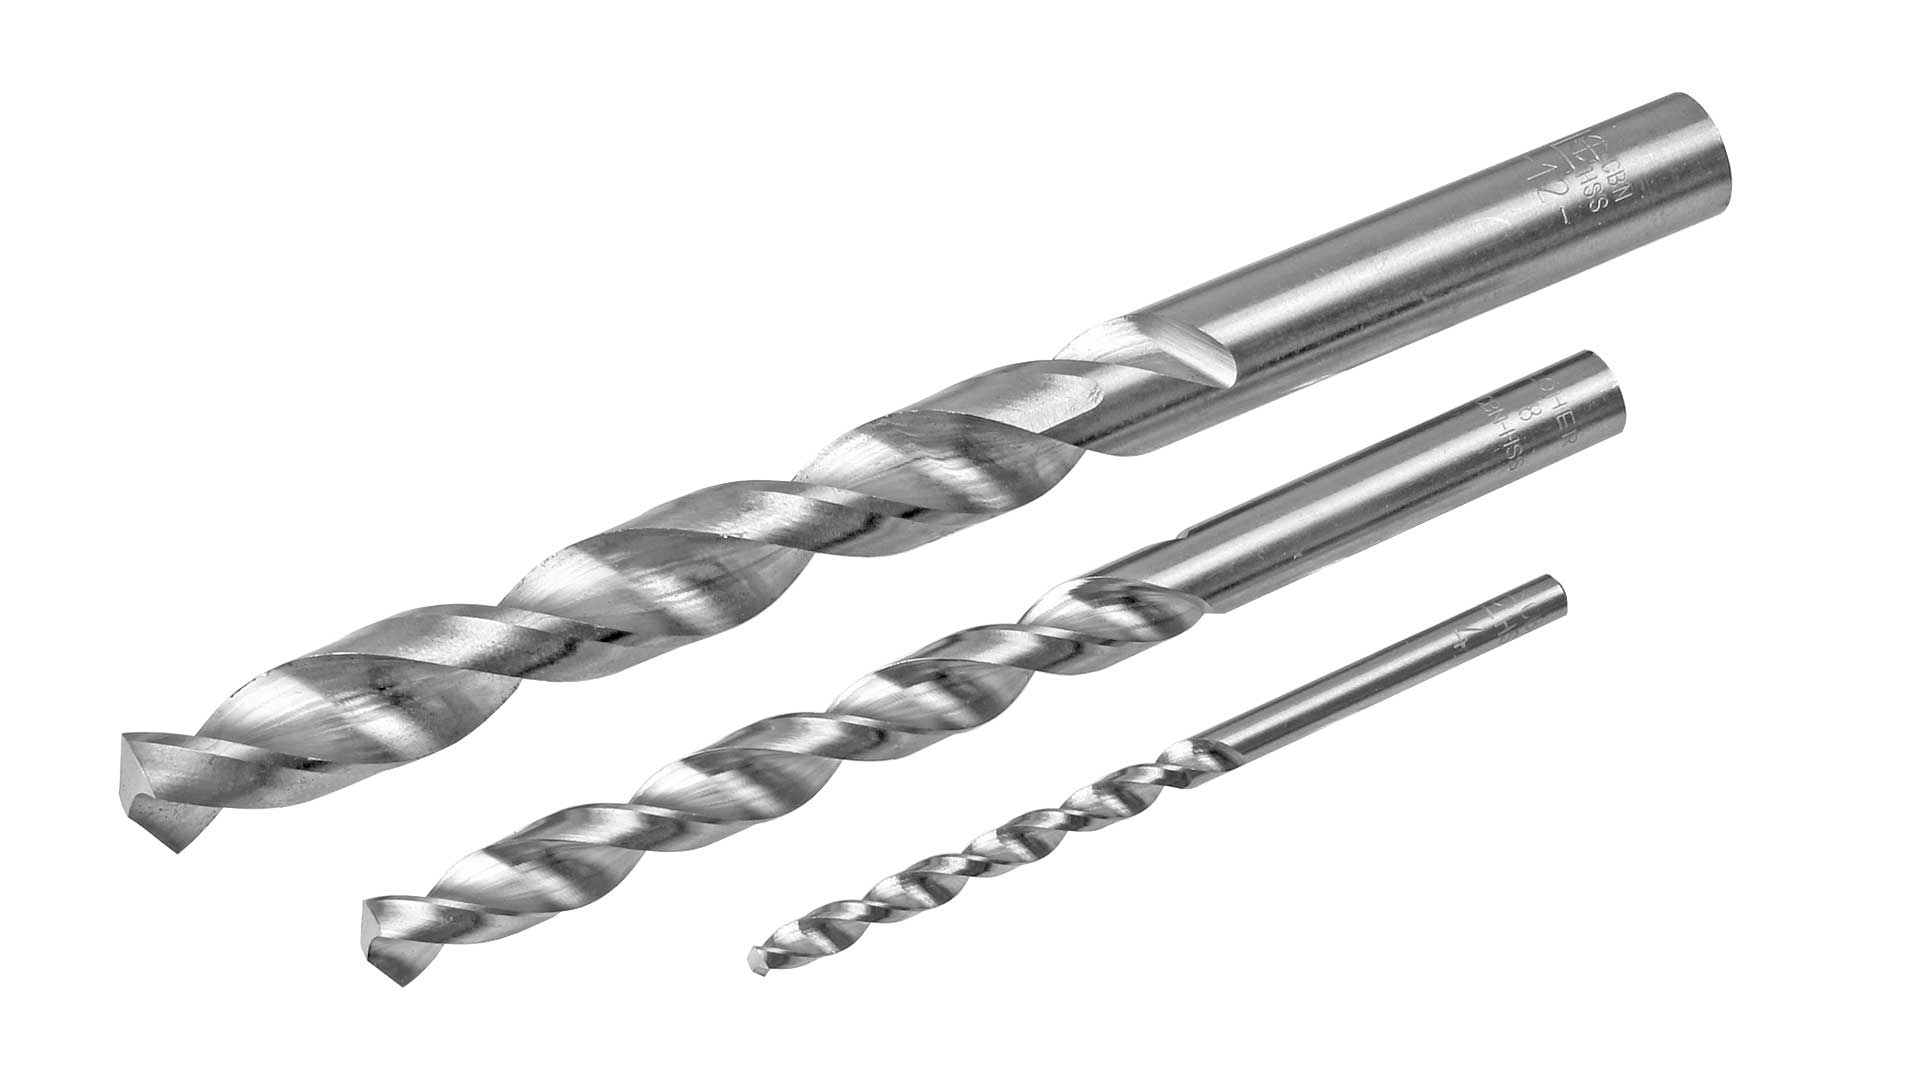 Can You Bolt Aluminum to Stainless Steel Drill Bits?